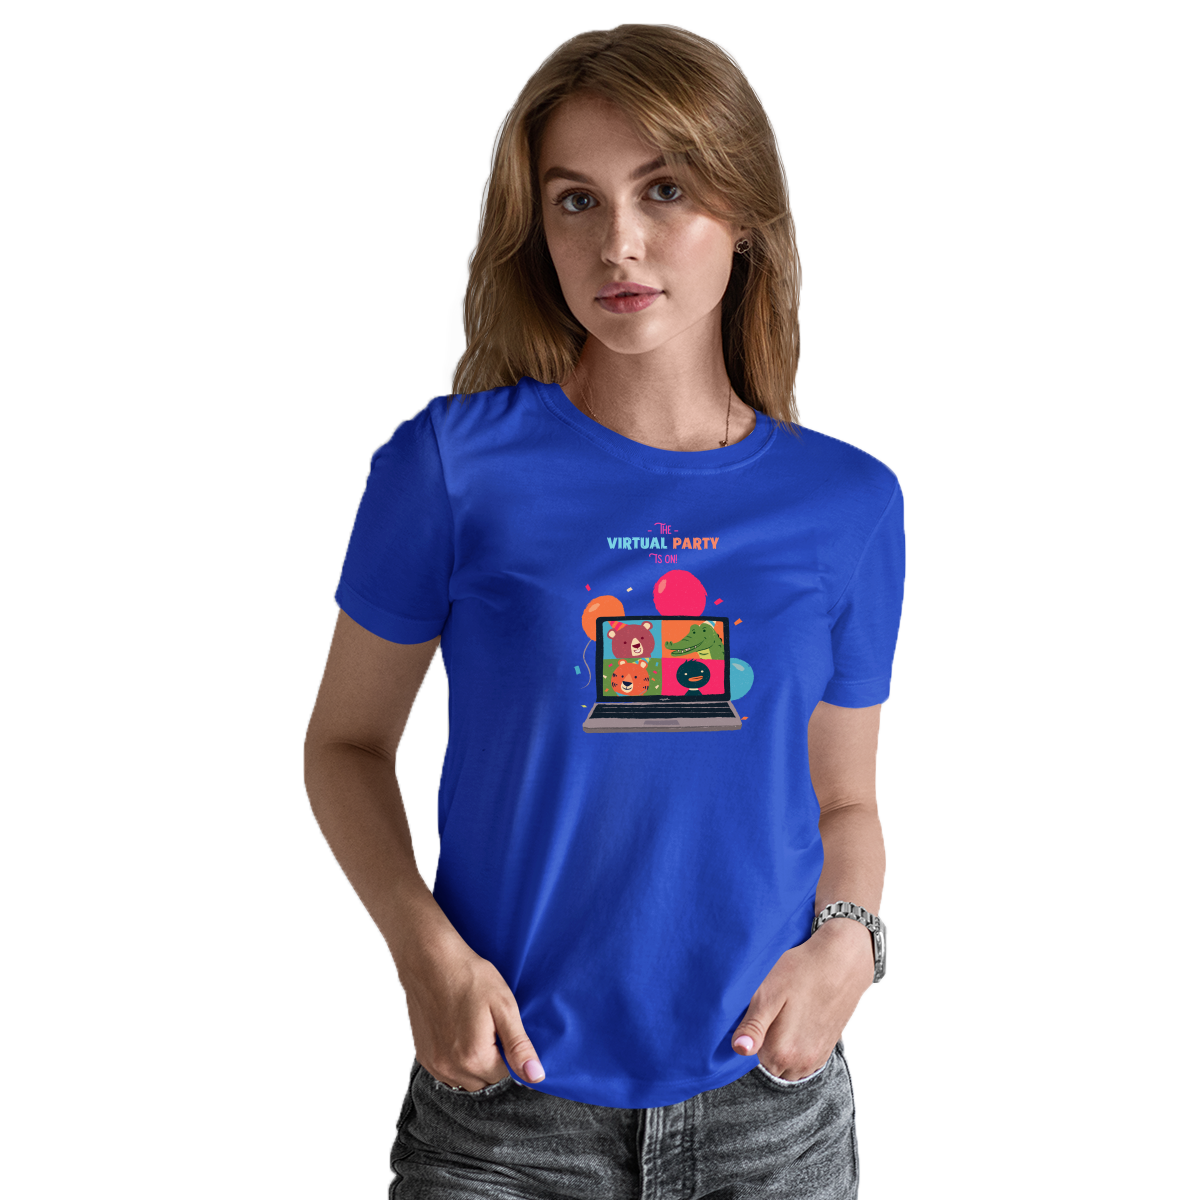 The Virtual Party is on Women's T-shirt | Blue